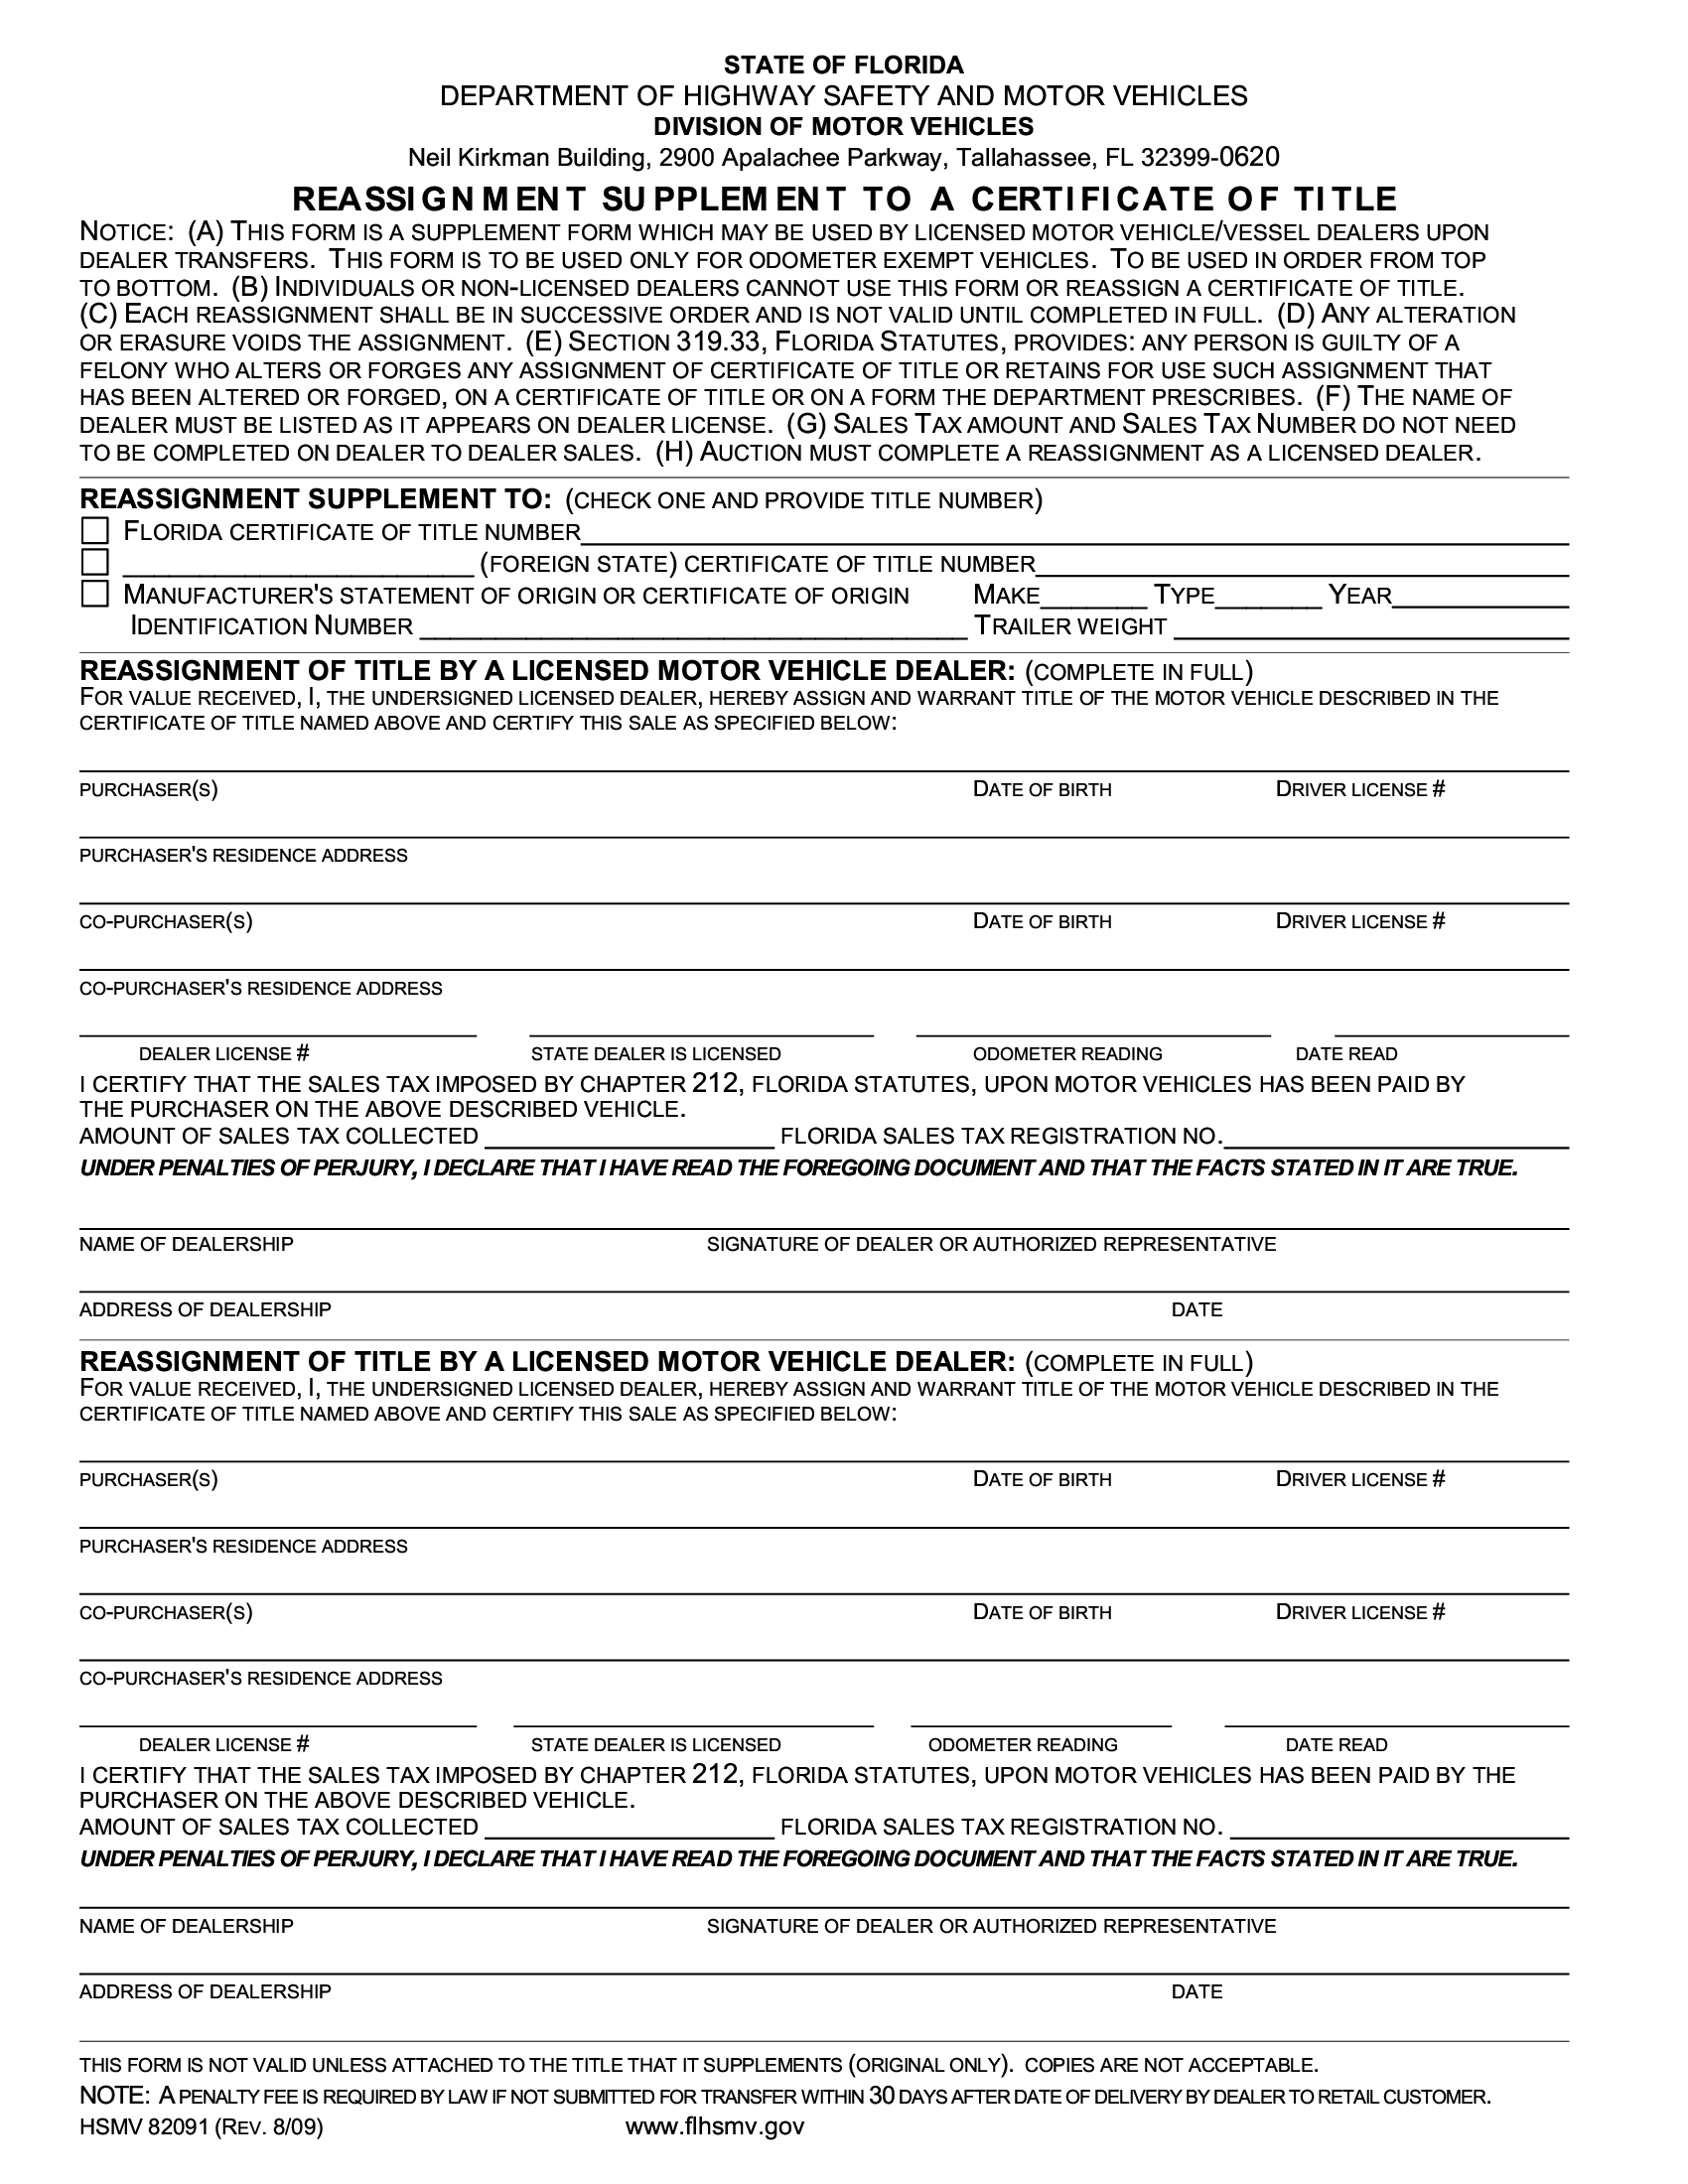 reassignment form